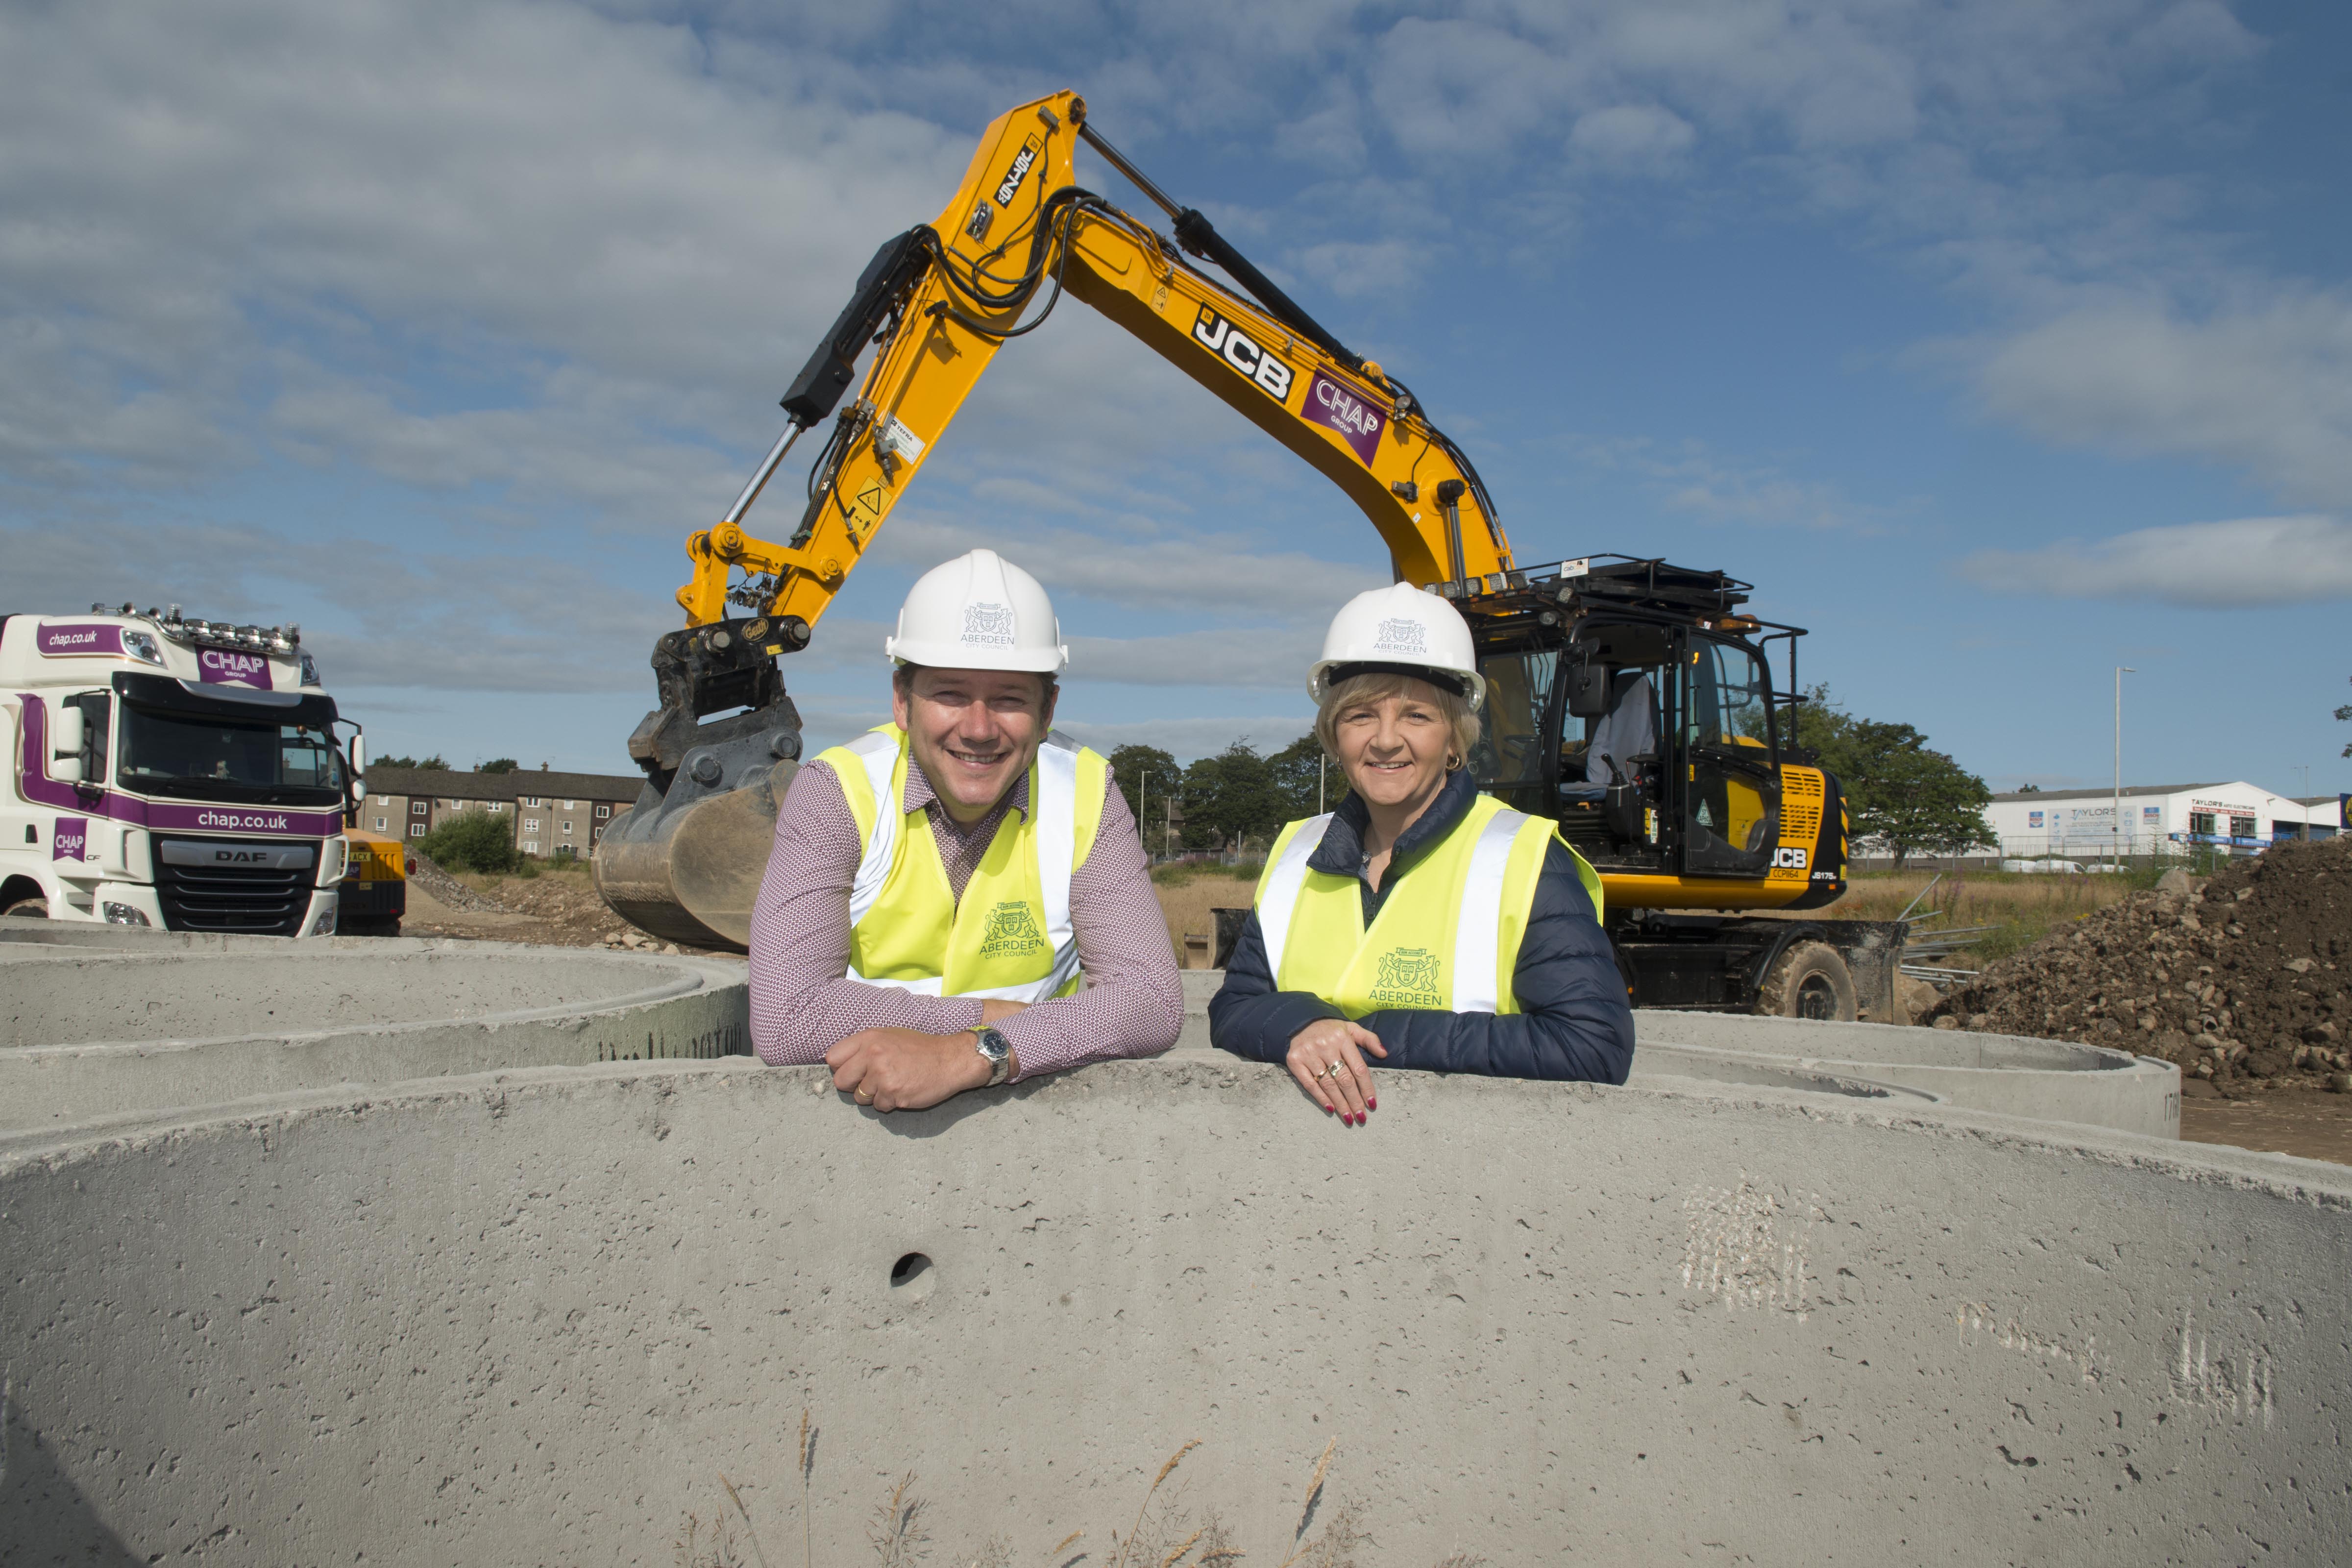 Council co-leaders Douglas Lumsden and Jenny Laing at the former Summerhill Academy site last August, as work started on 369 council houses.